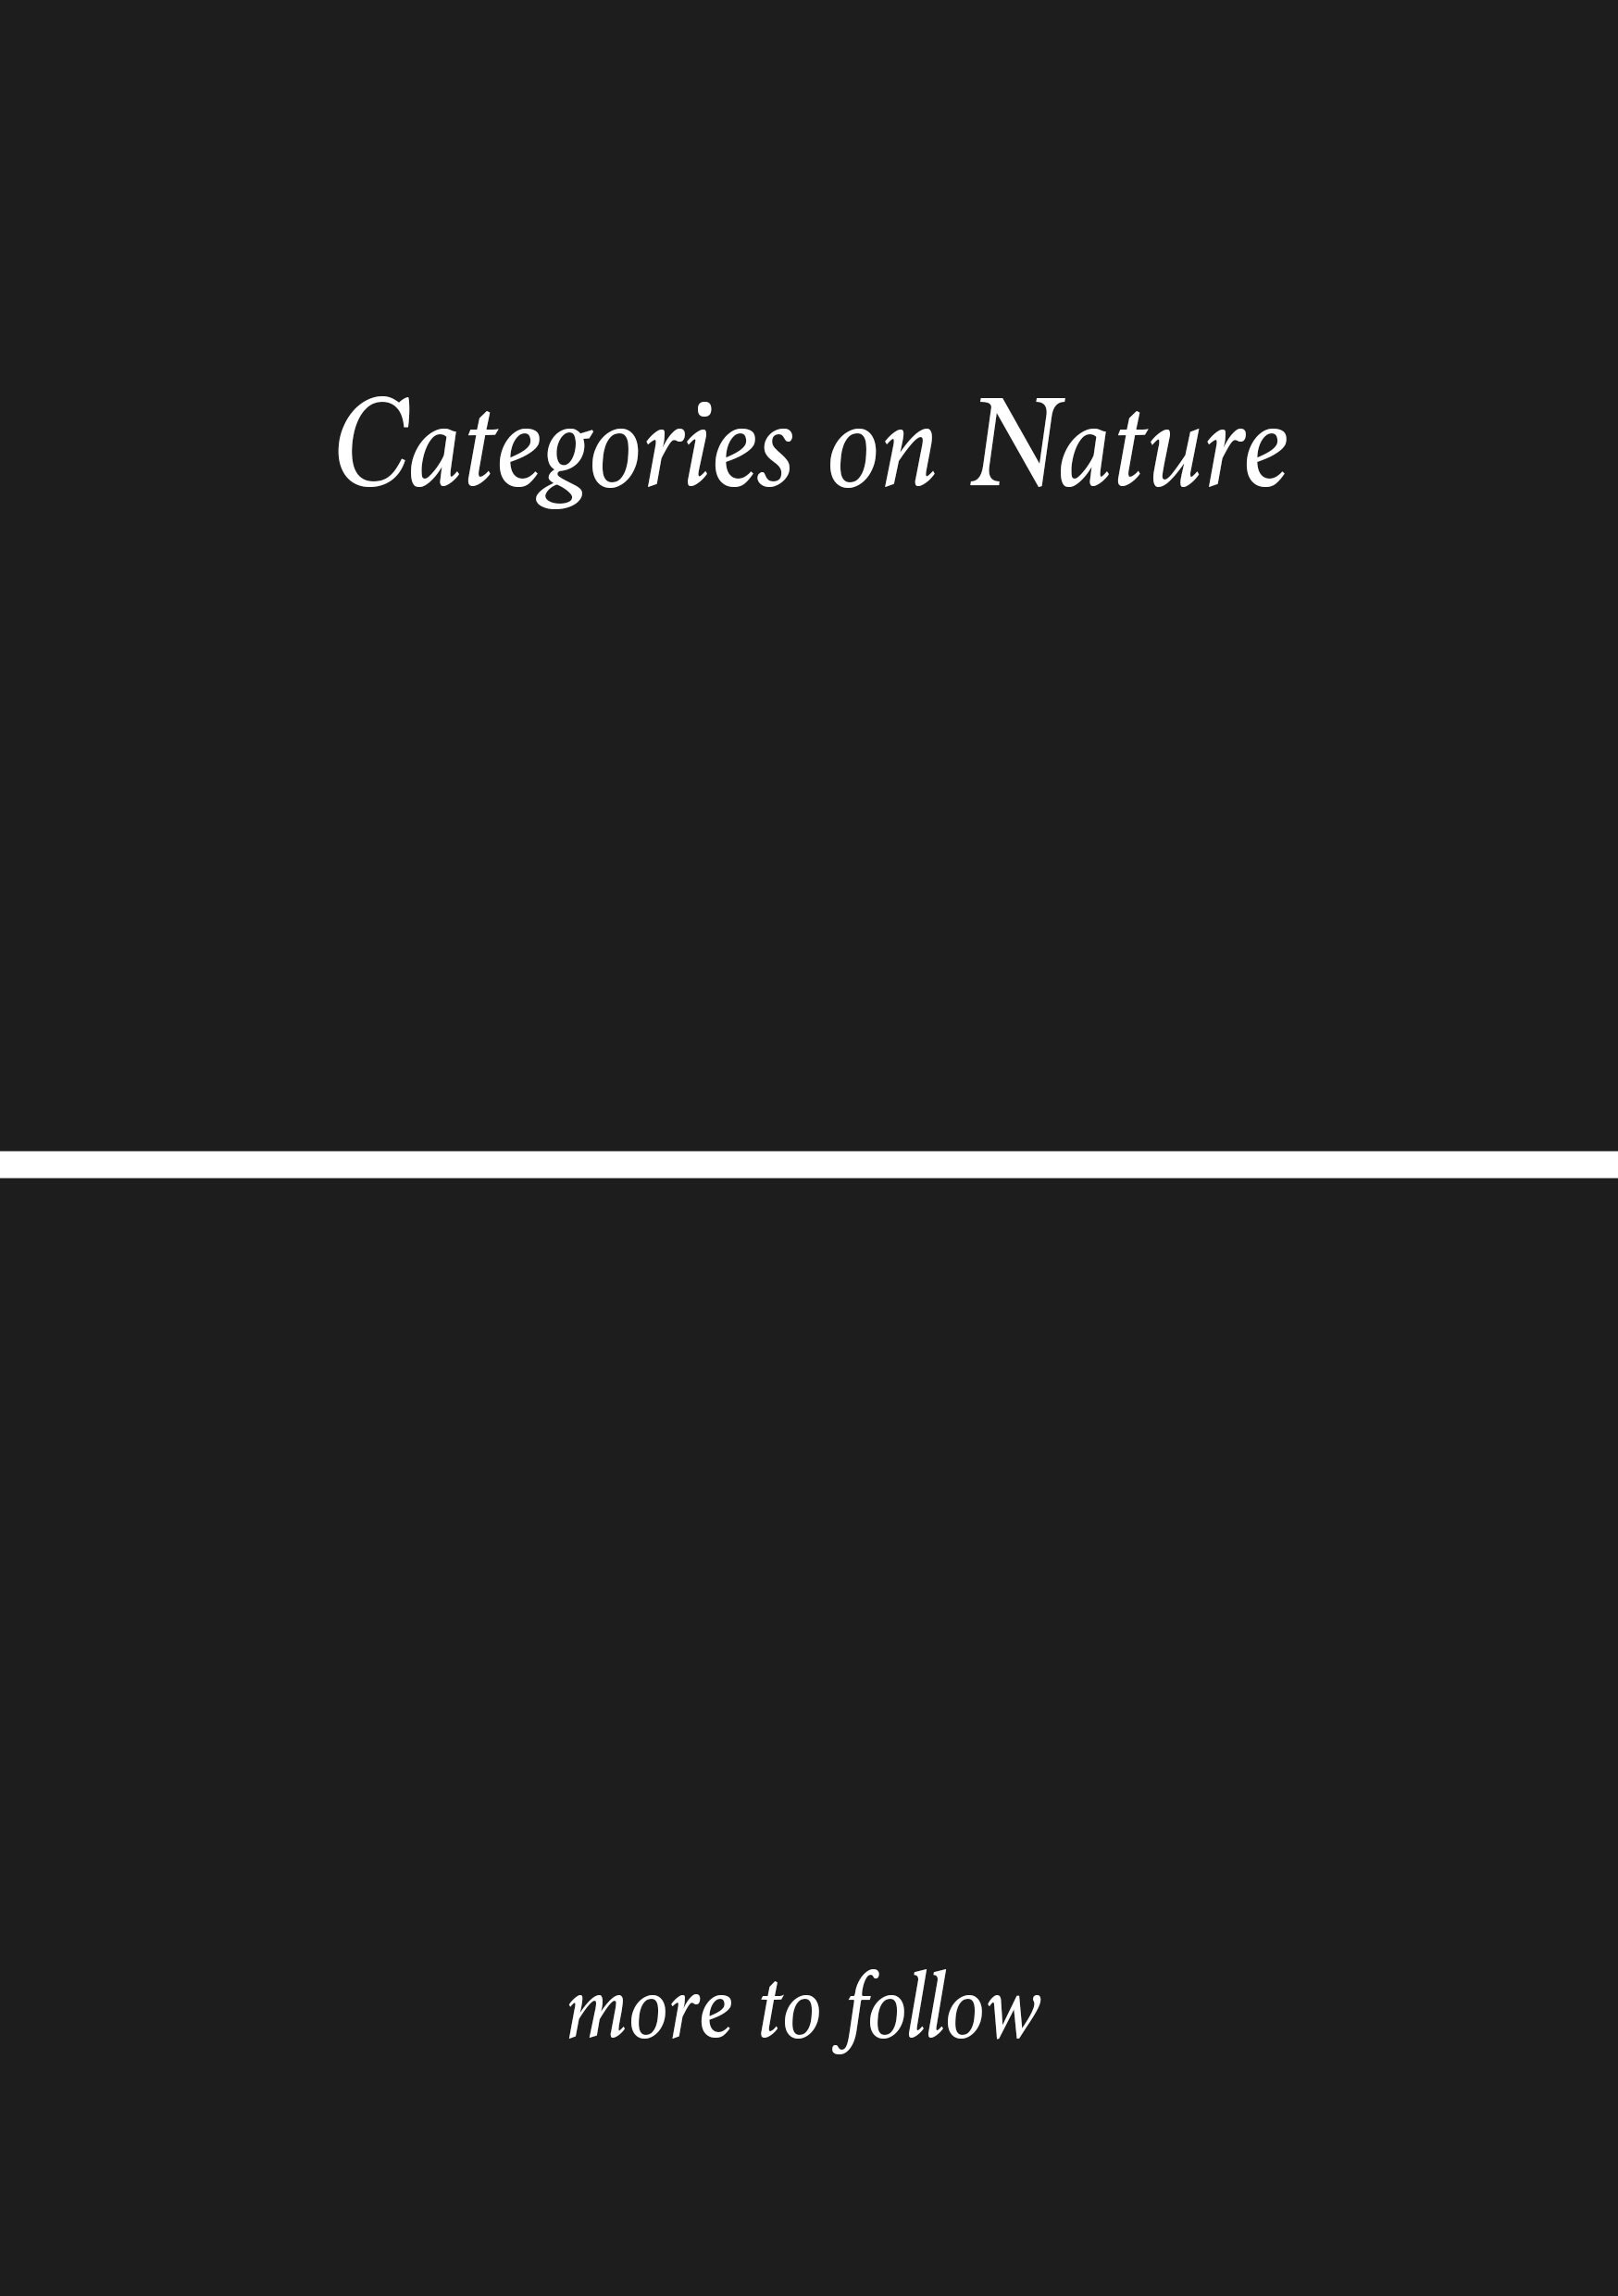 rachela abbate COVER_front_ categories on nature (more to follow) 